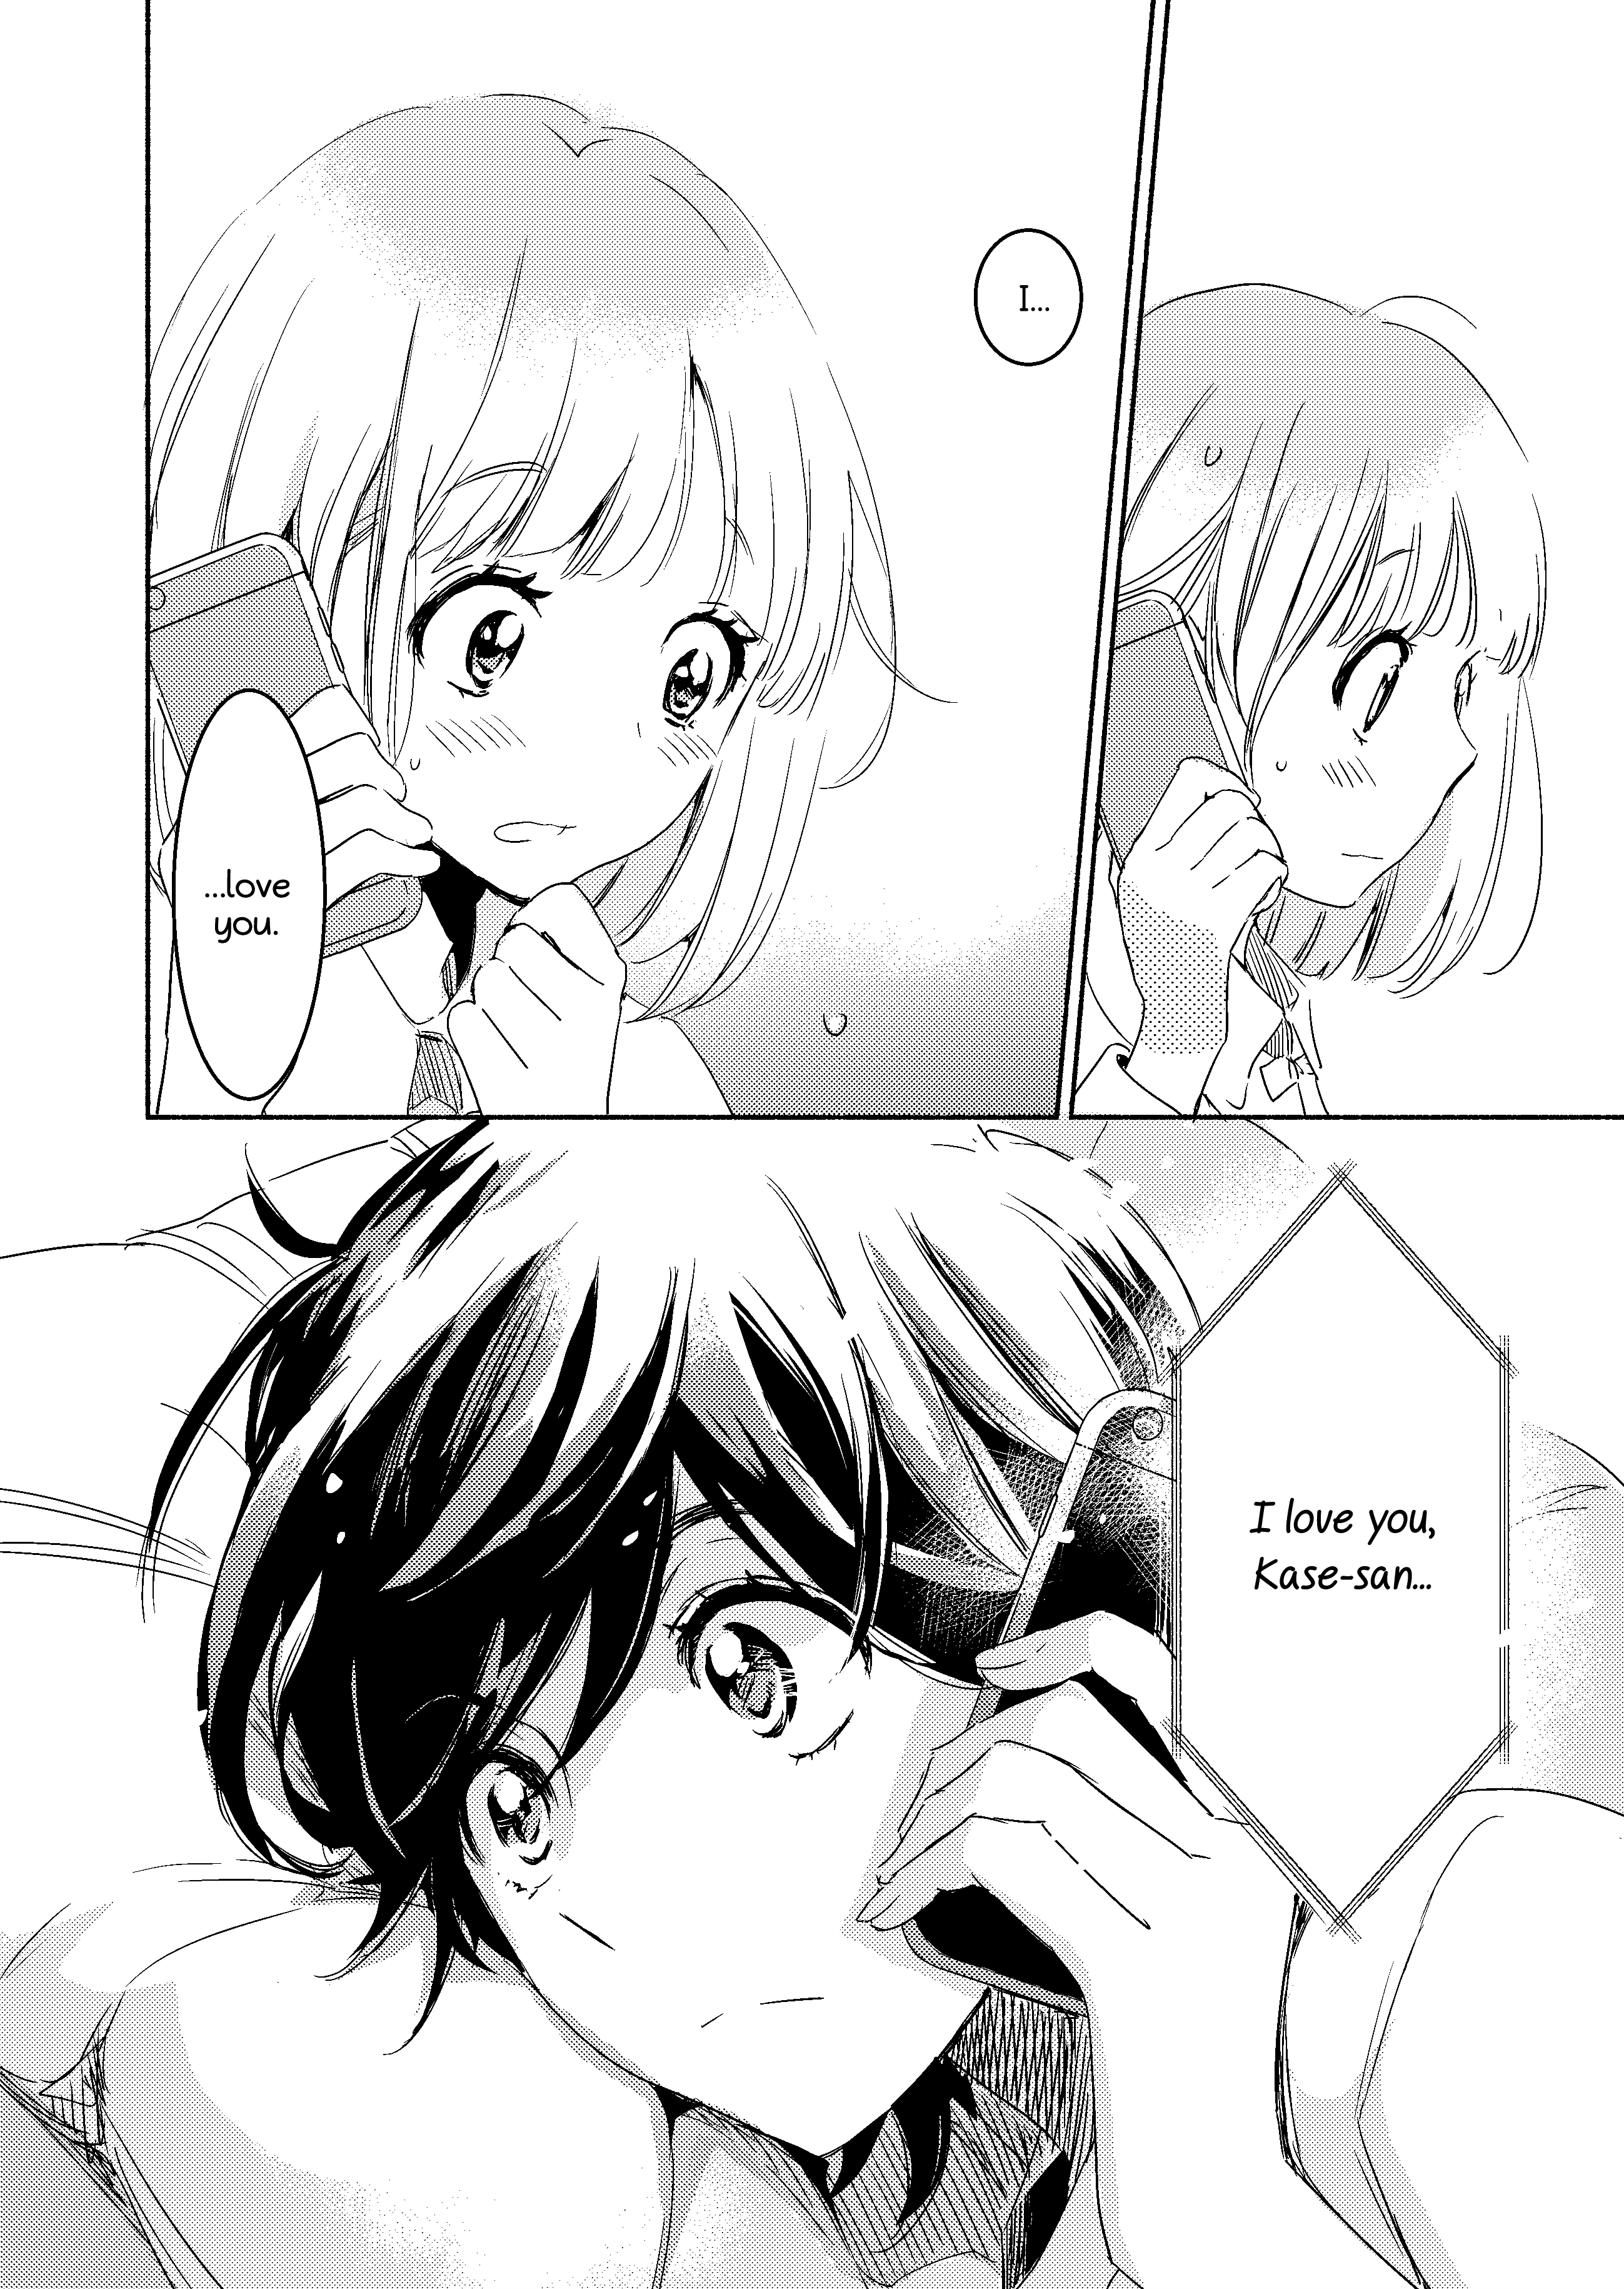 Yamada To Kase-San Chapter 13.5: Extra - Lights Out And Kase-San - Picture 3